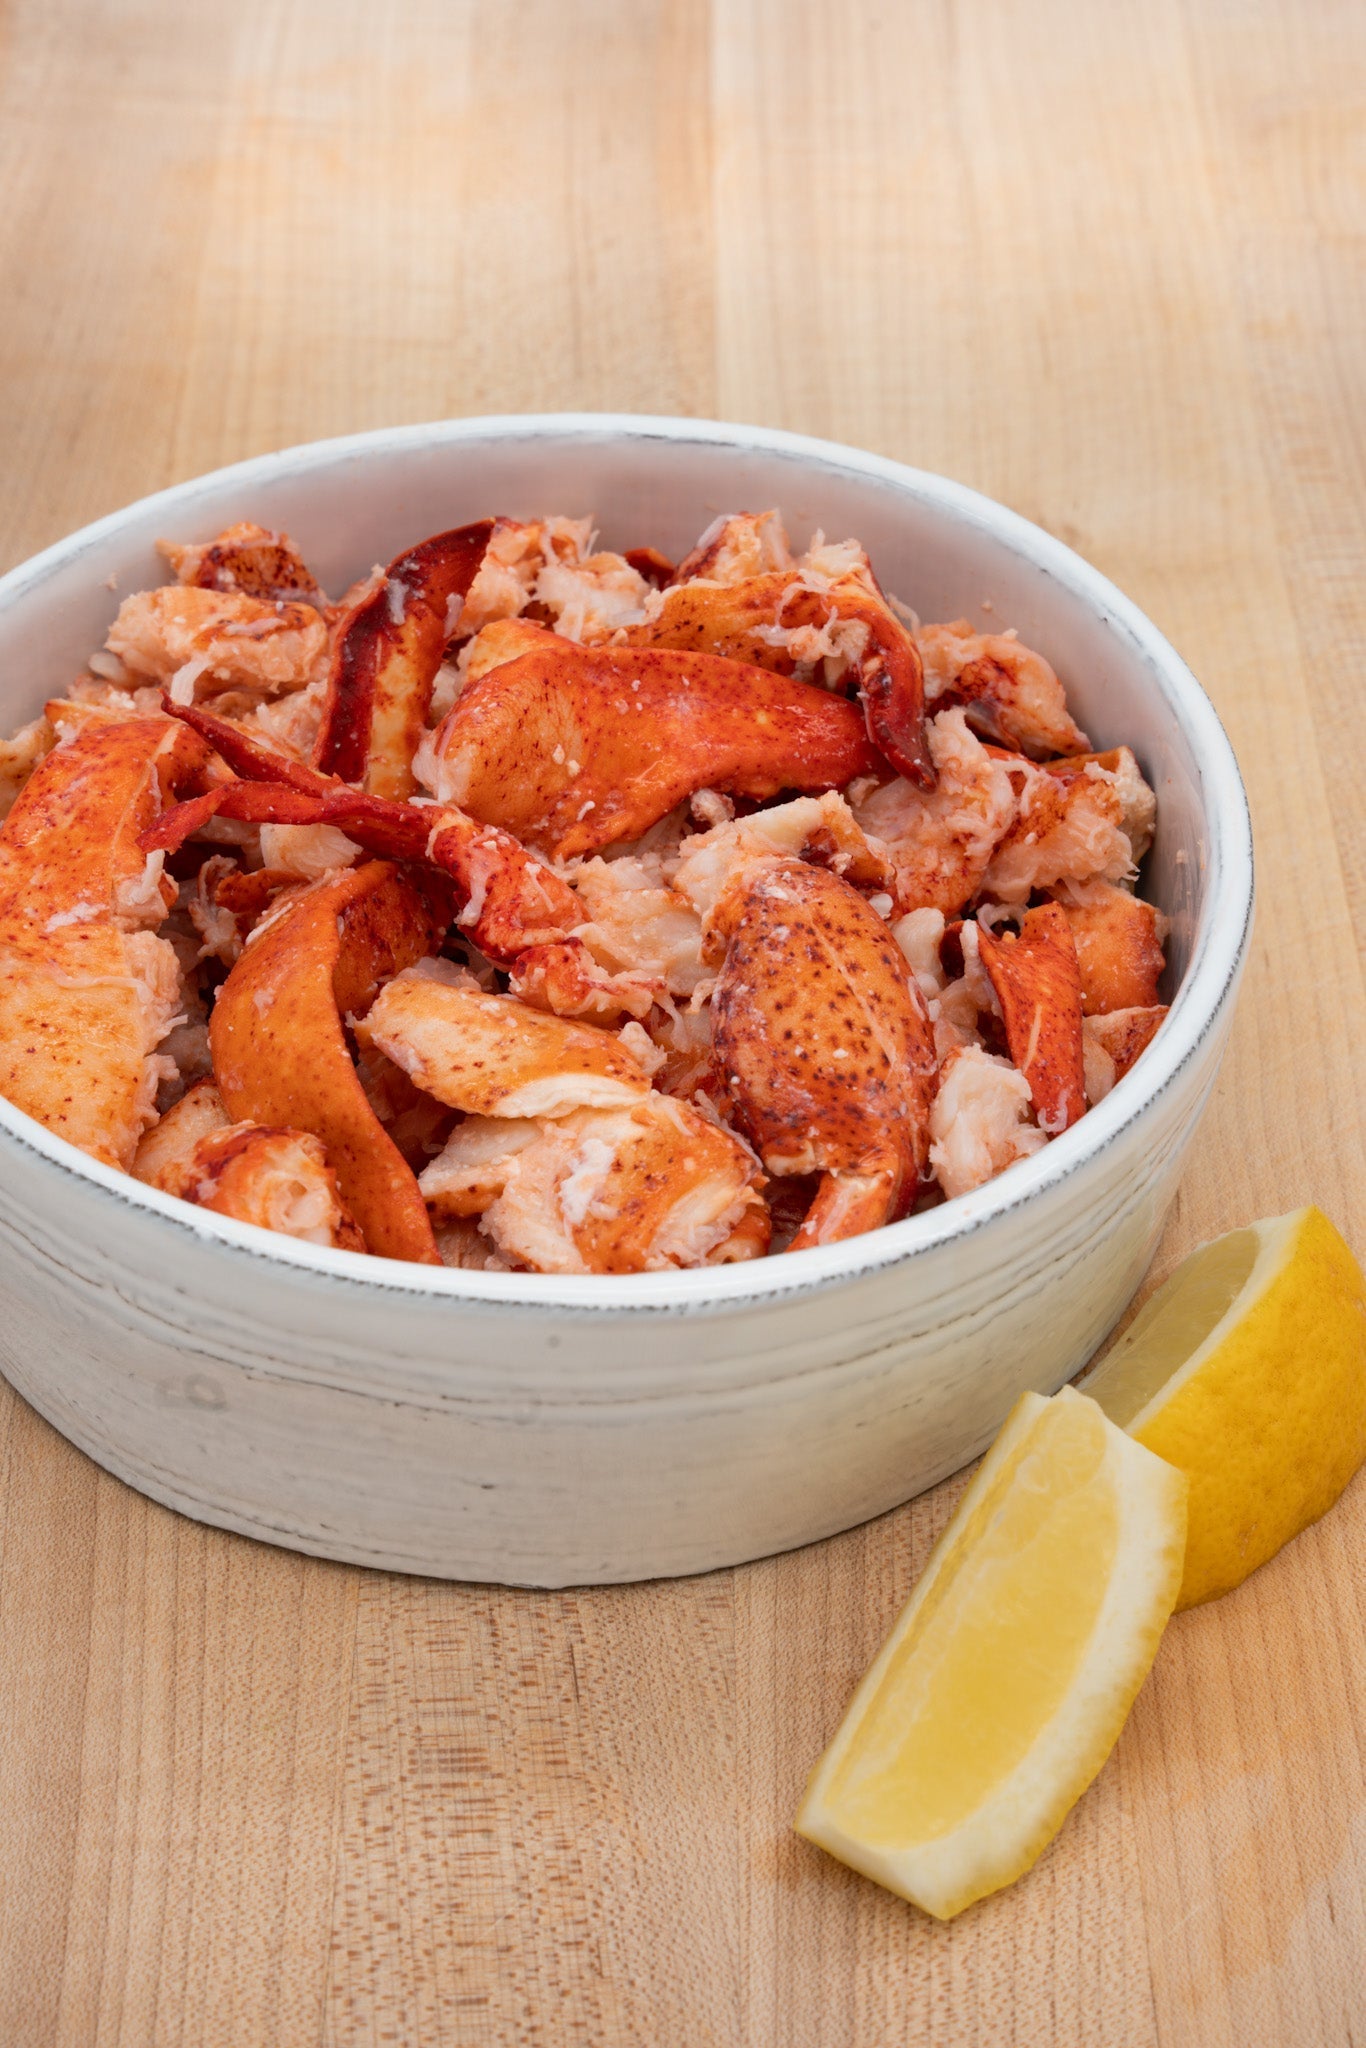 Maine Lobster Meat - 1 lb